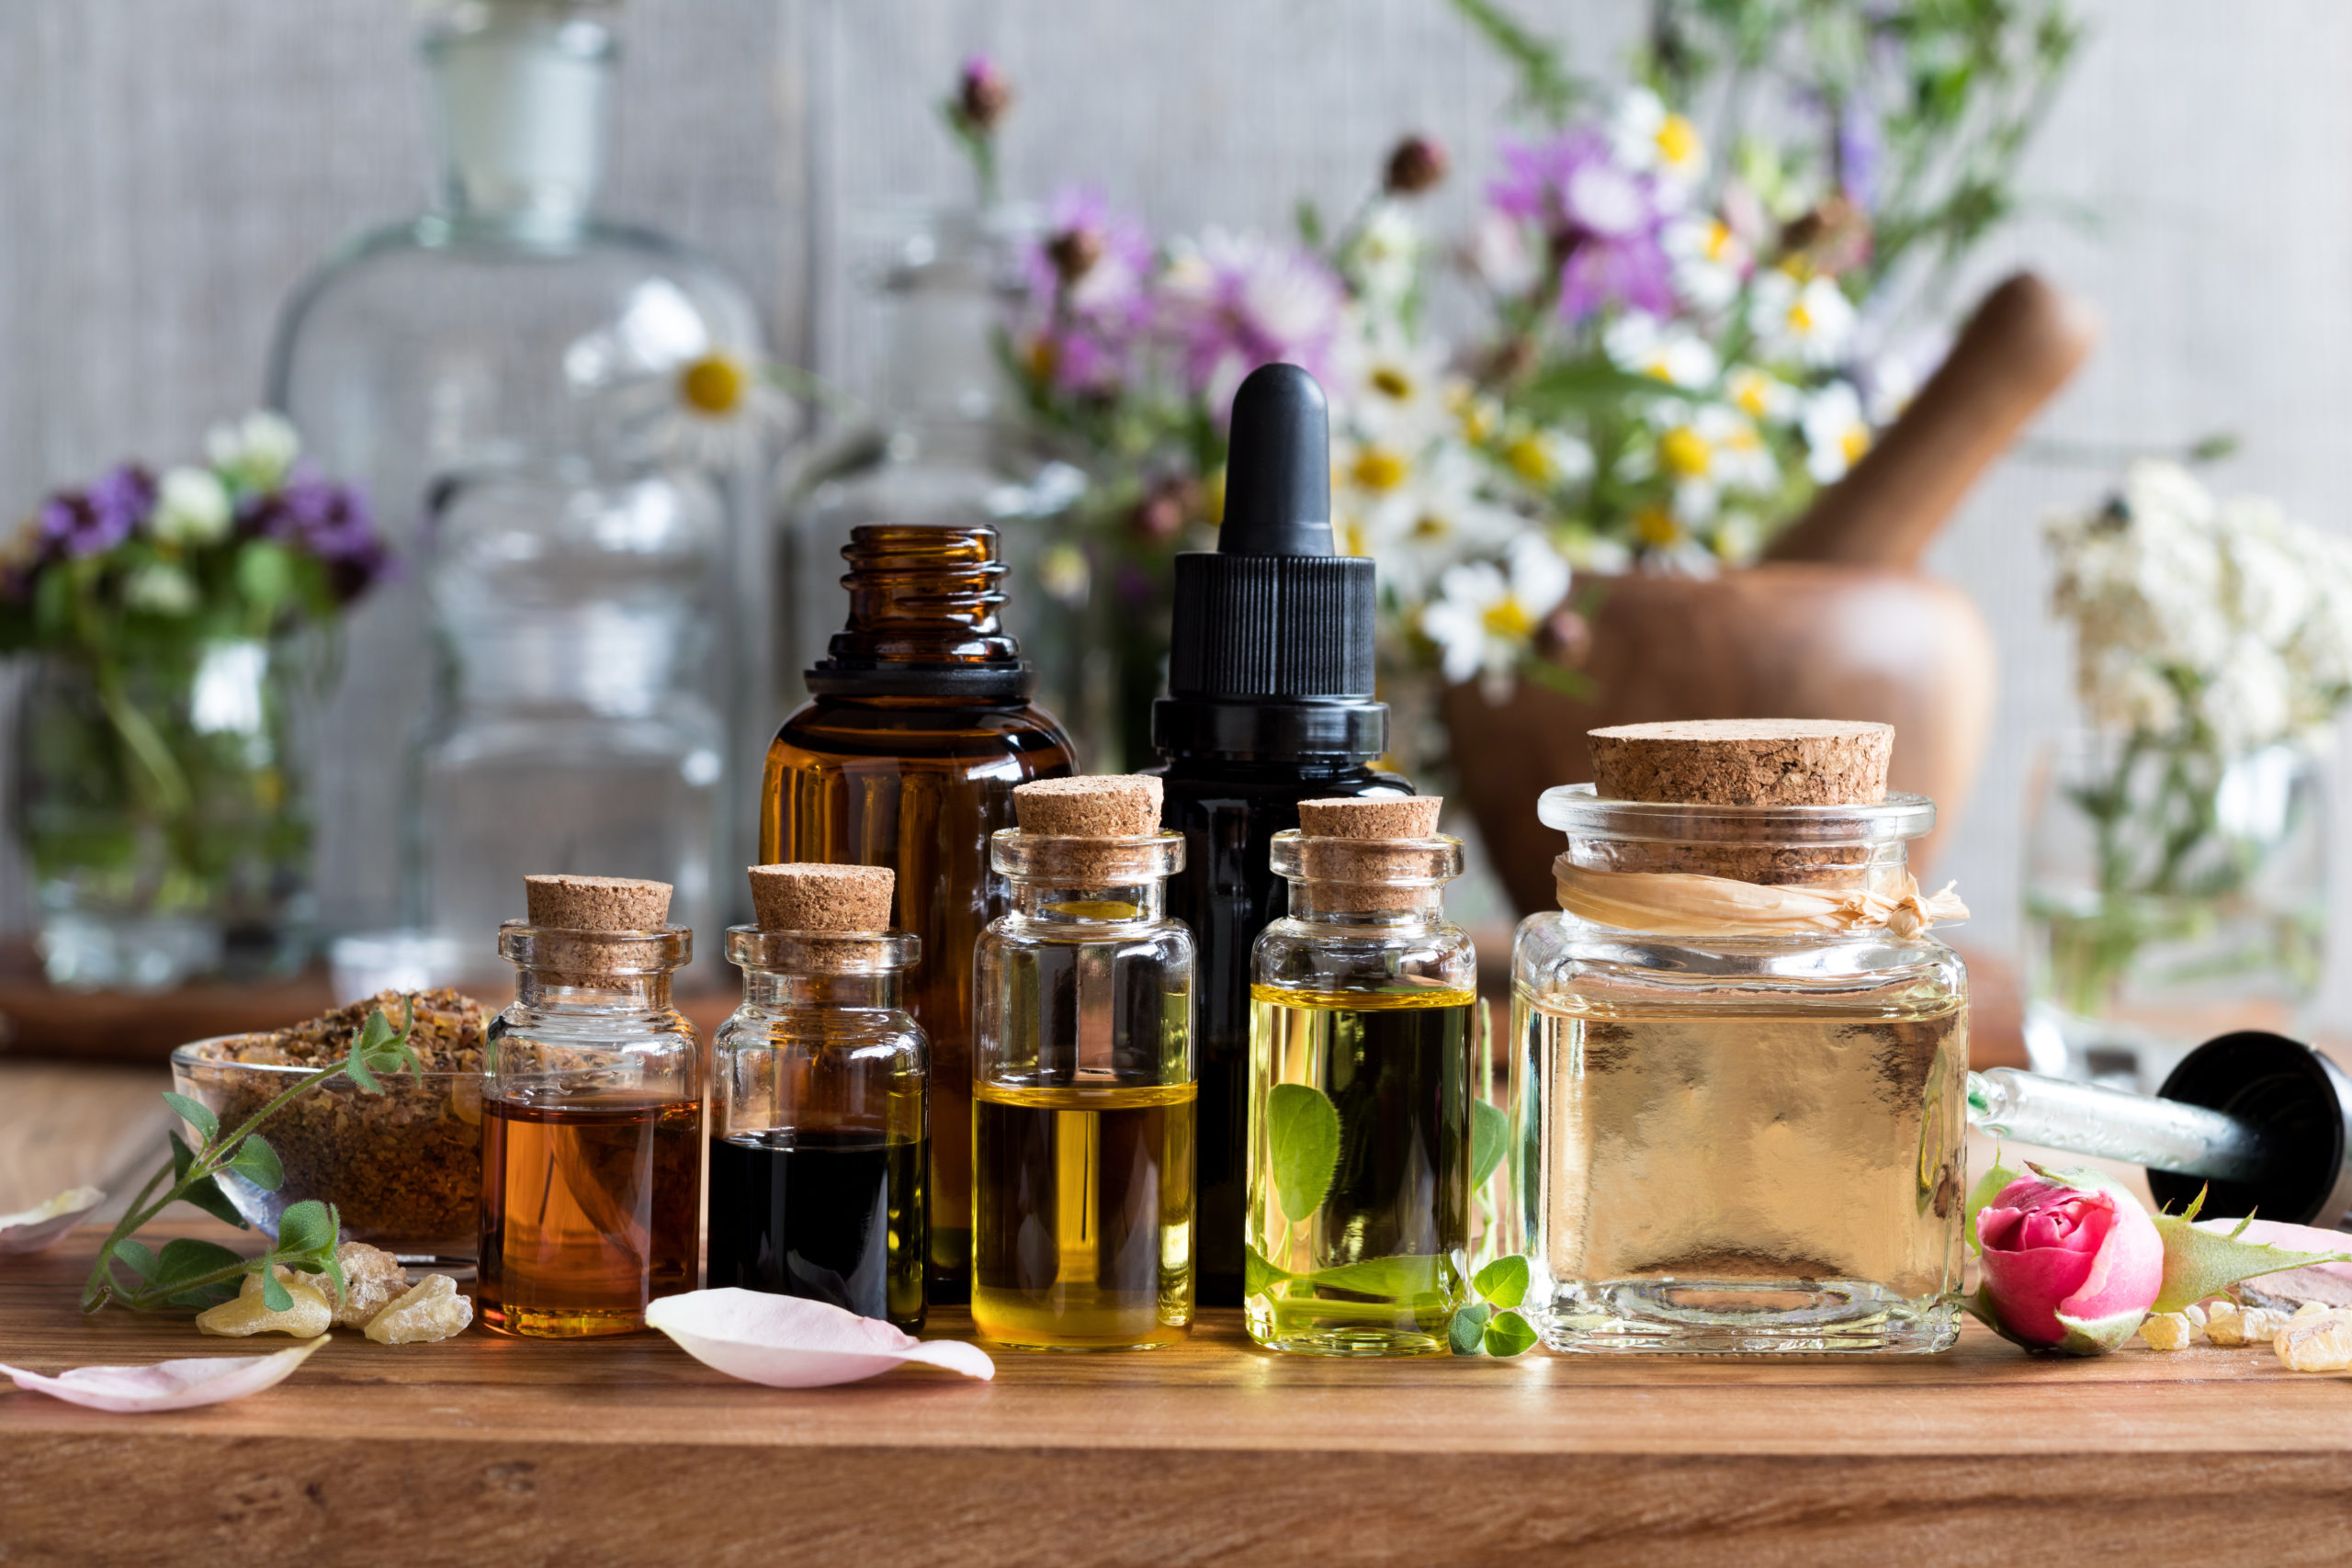 Selection of essential oils with herbs and flowers